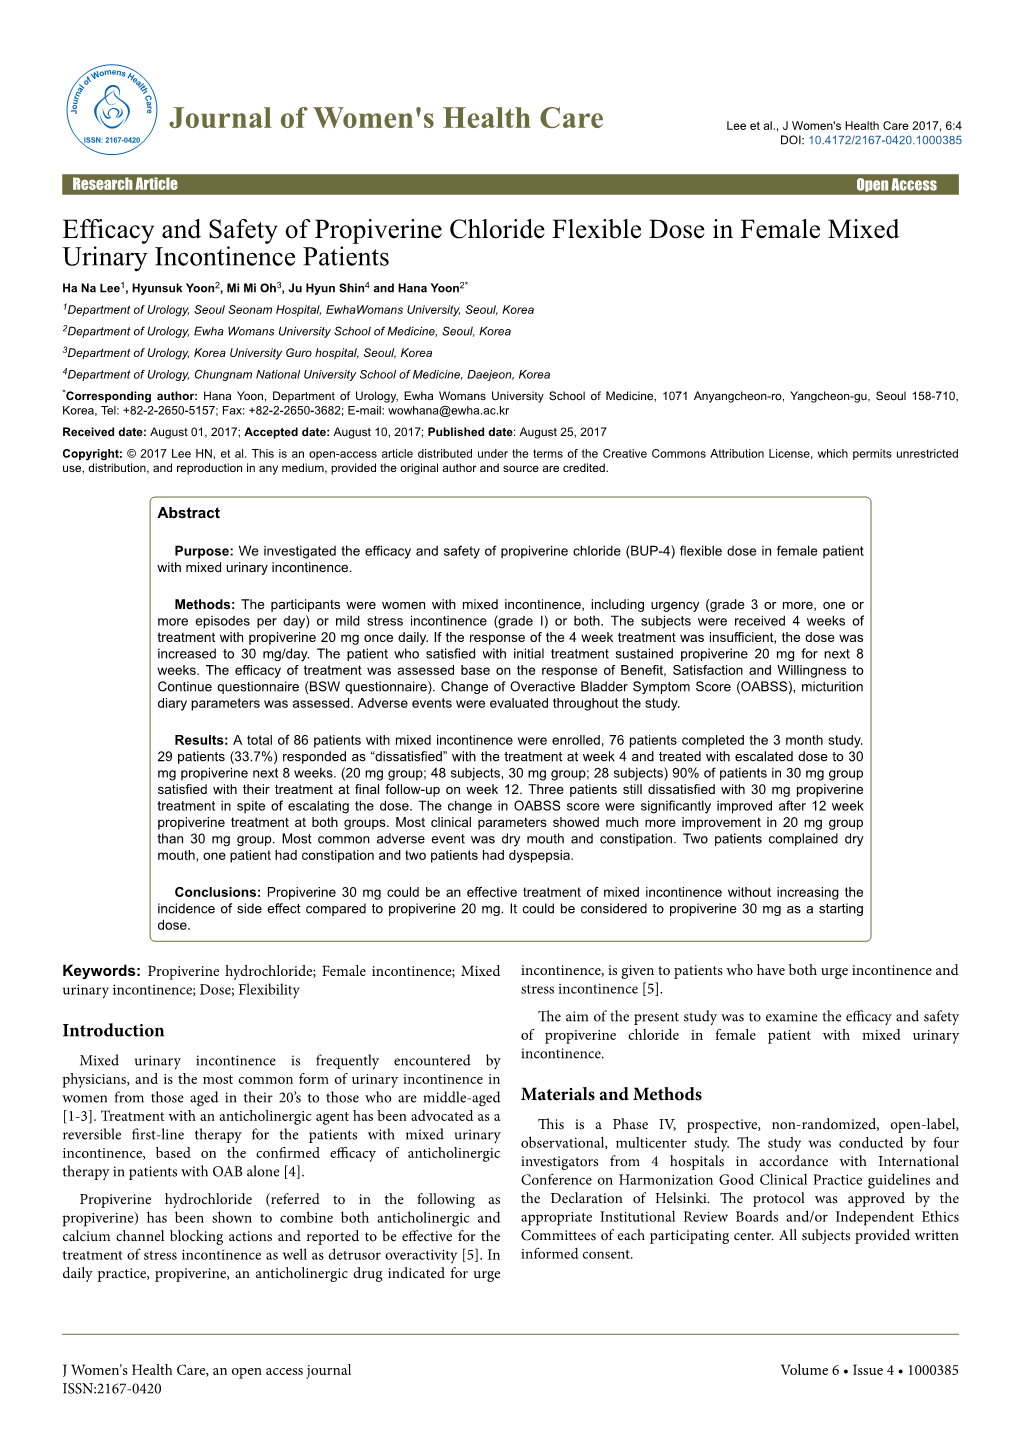 Efficacy and Safety of Propiverine Chloride Flexible Dose in Female